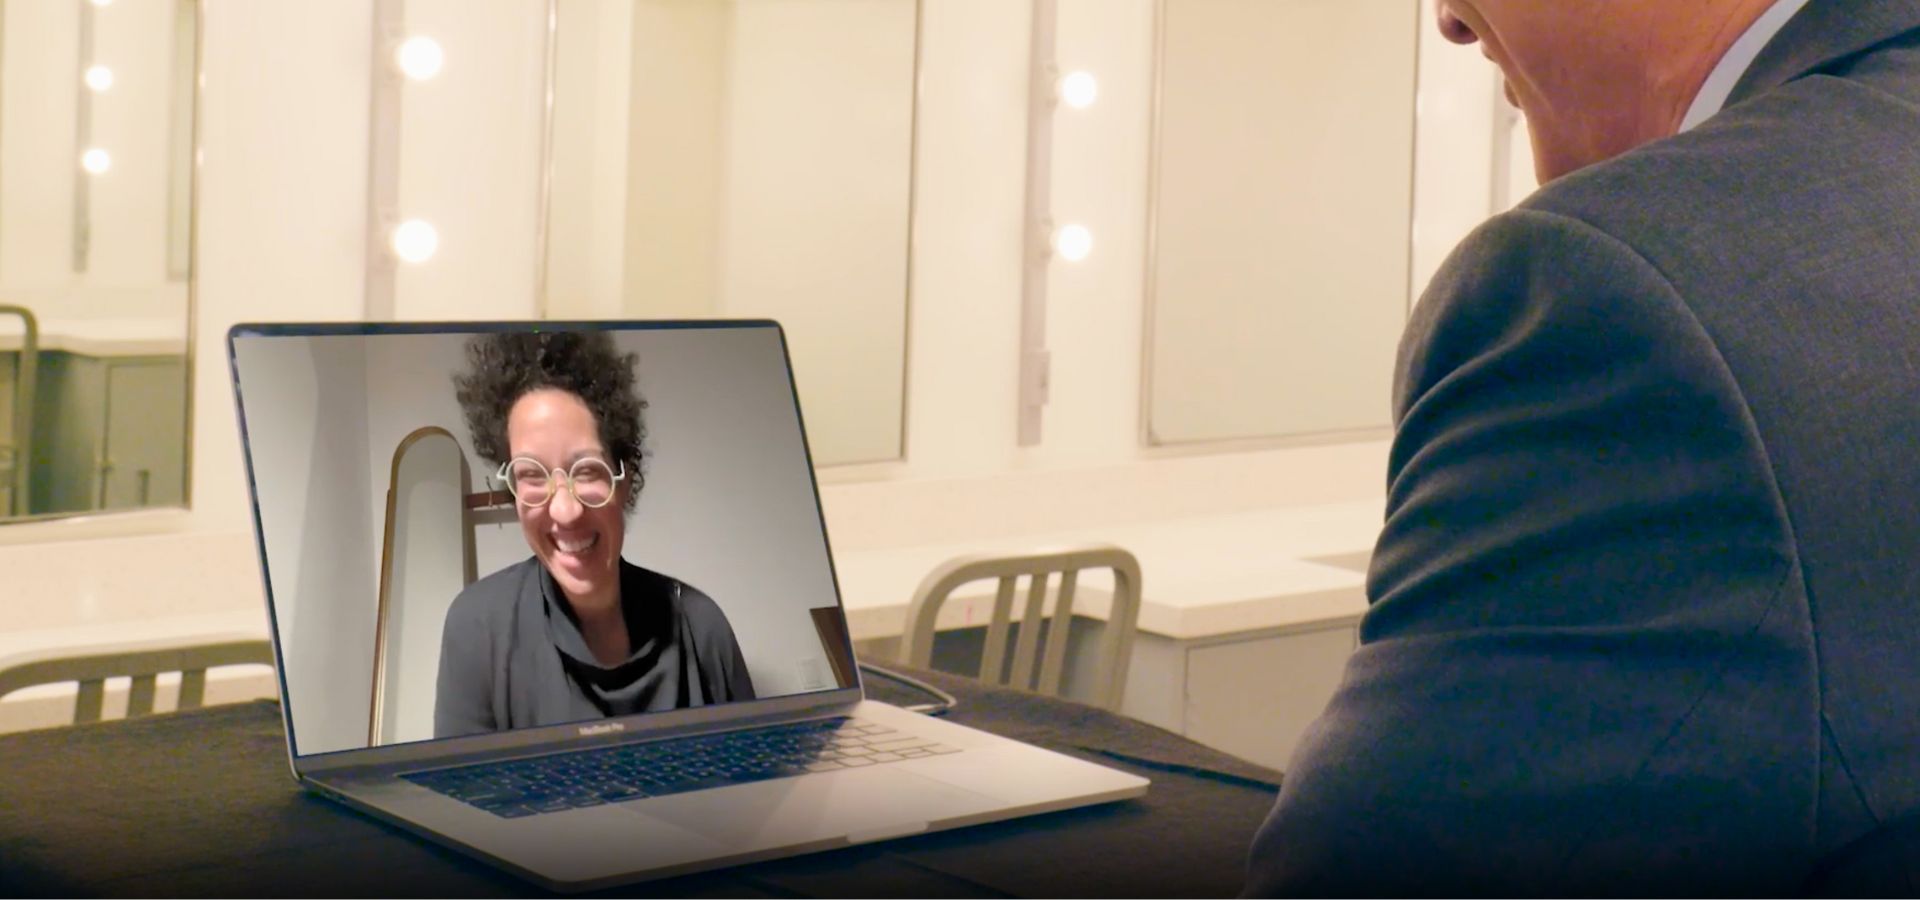 Artist Julia Bullock’s smiling face shown from a video call on a laptop screen.